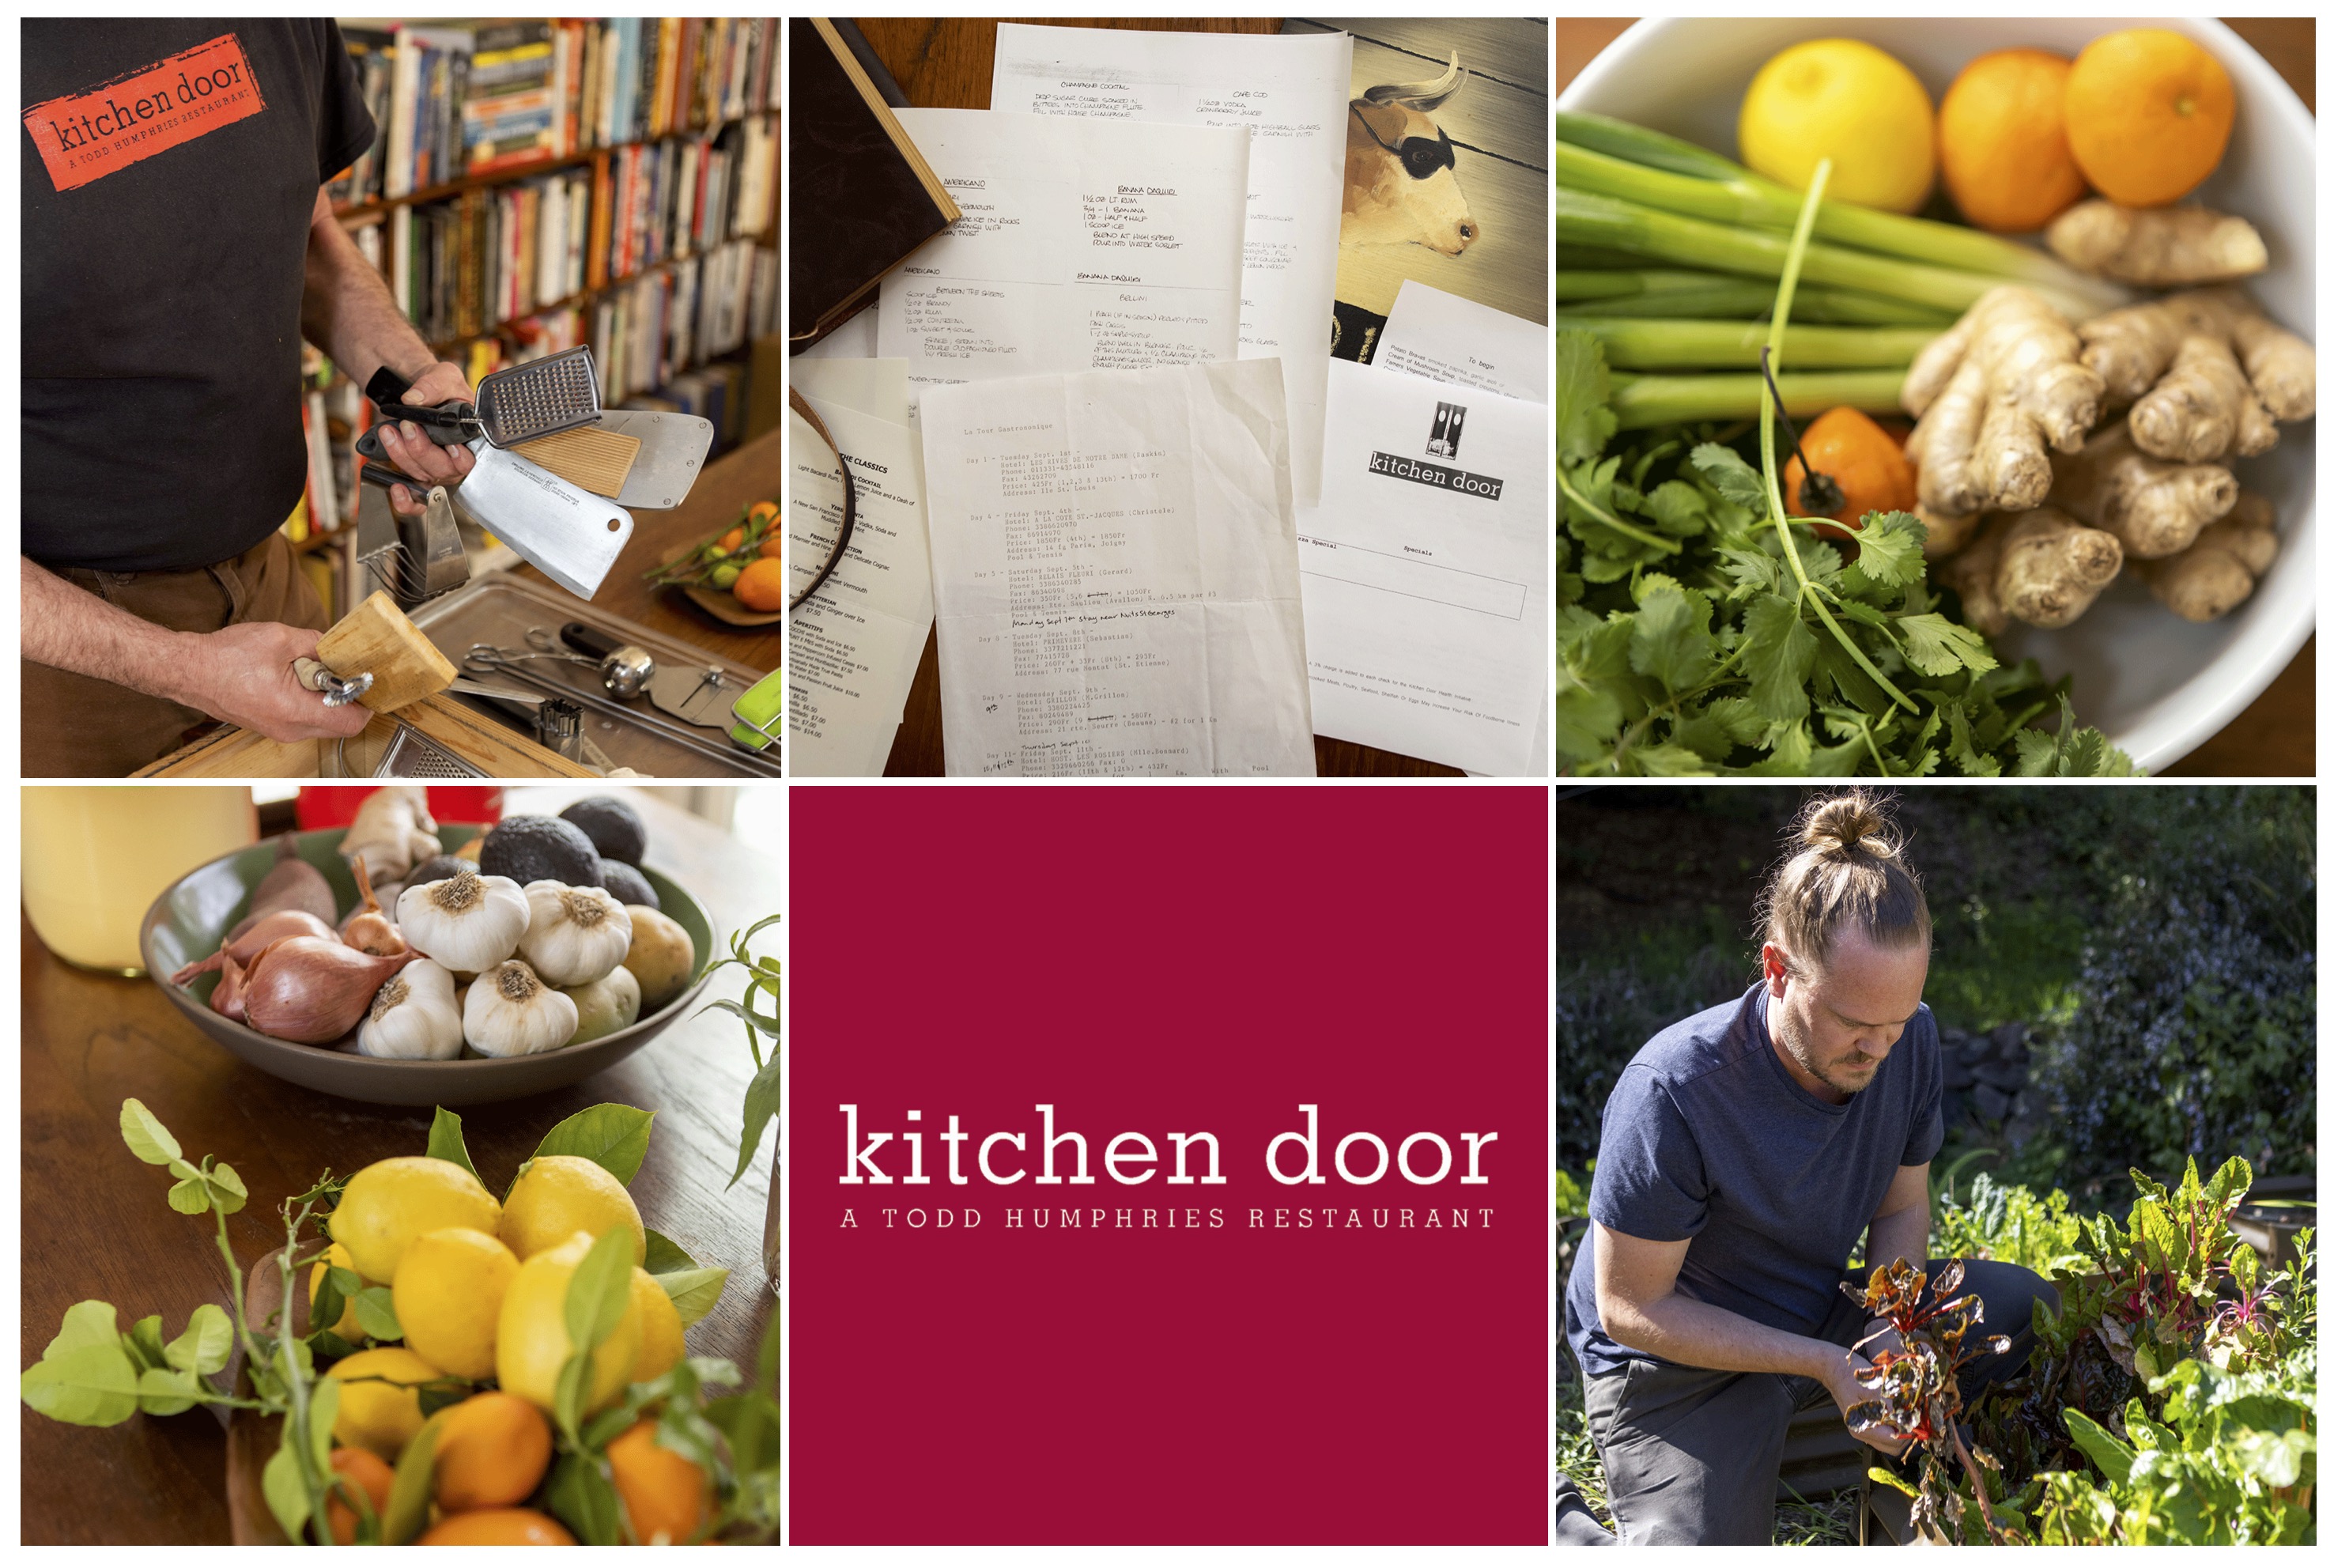 Kitchen Door is pleased to announce it will reopen on June 7, 2022, at its new location in downtown Napa at First Street Napa.